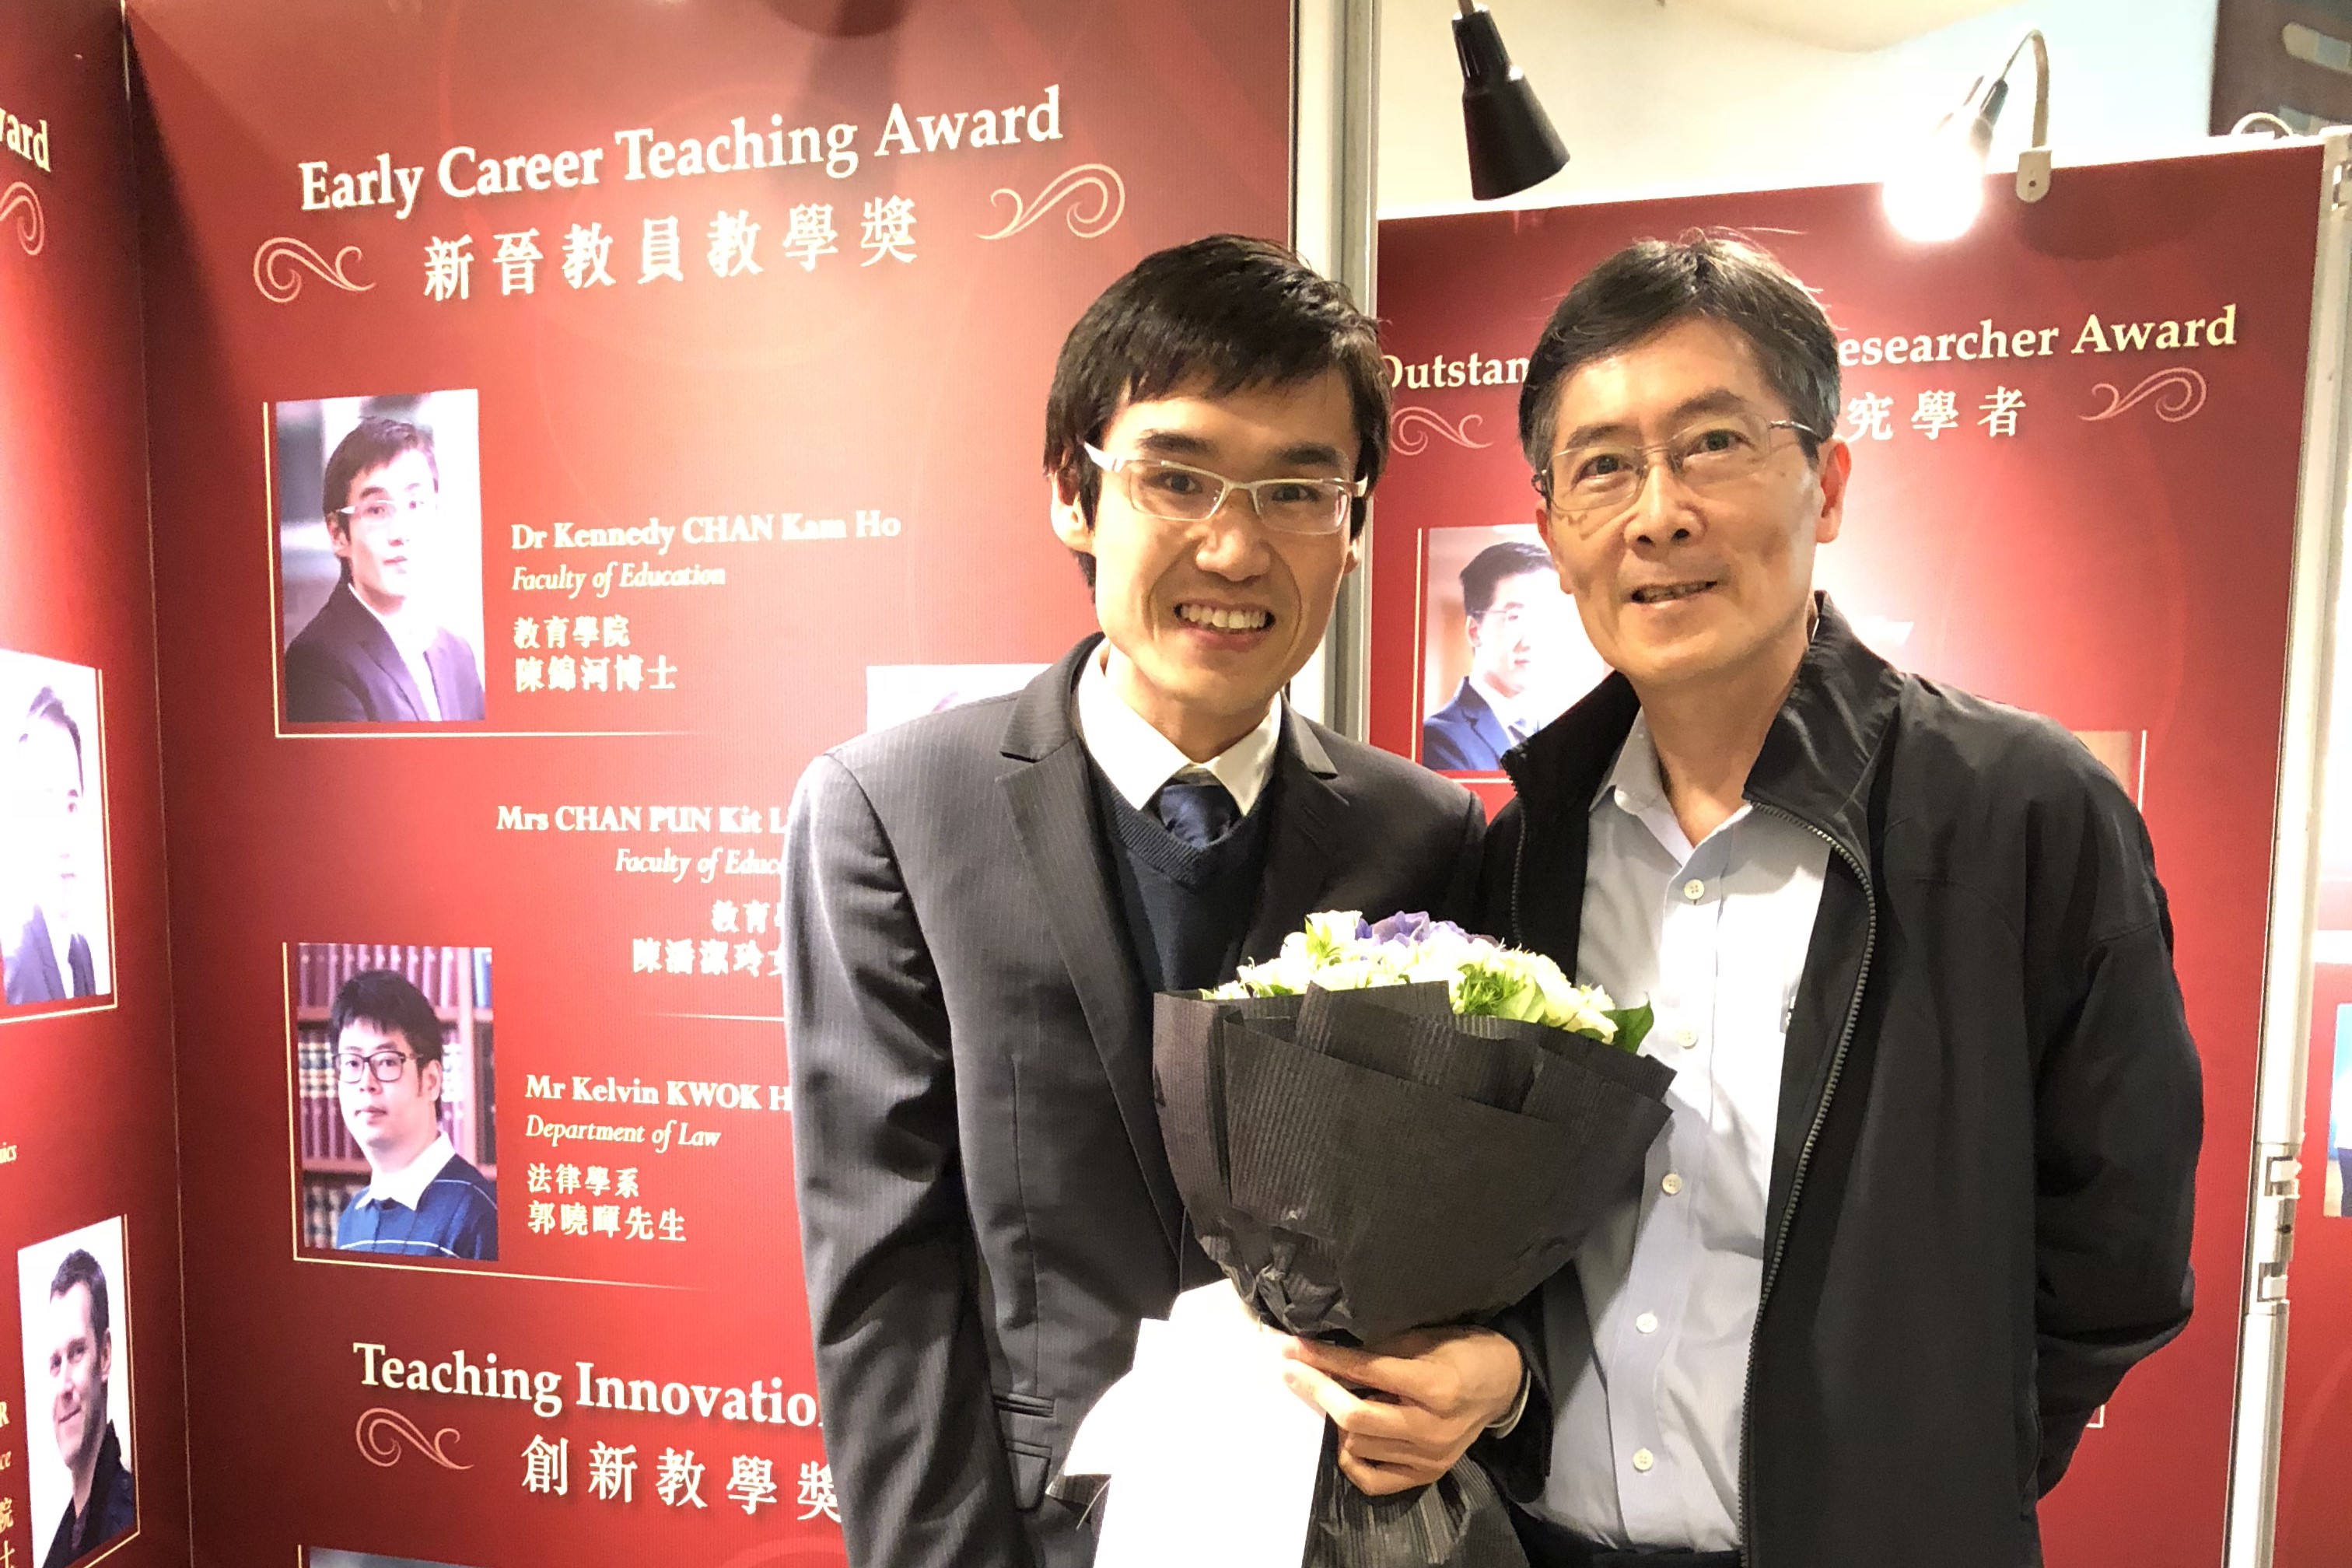 Dr Chan (left) with his PhD supervisor Dr Benny Yung